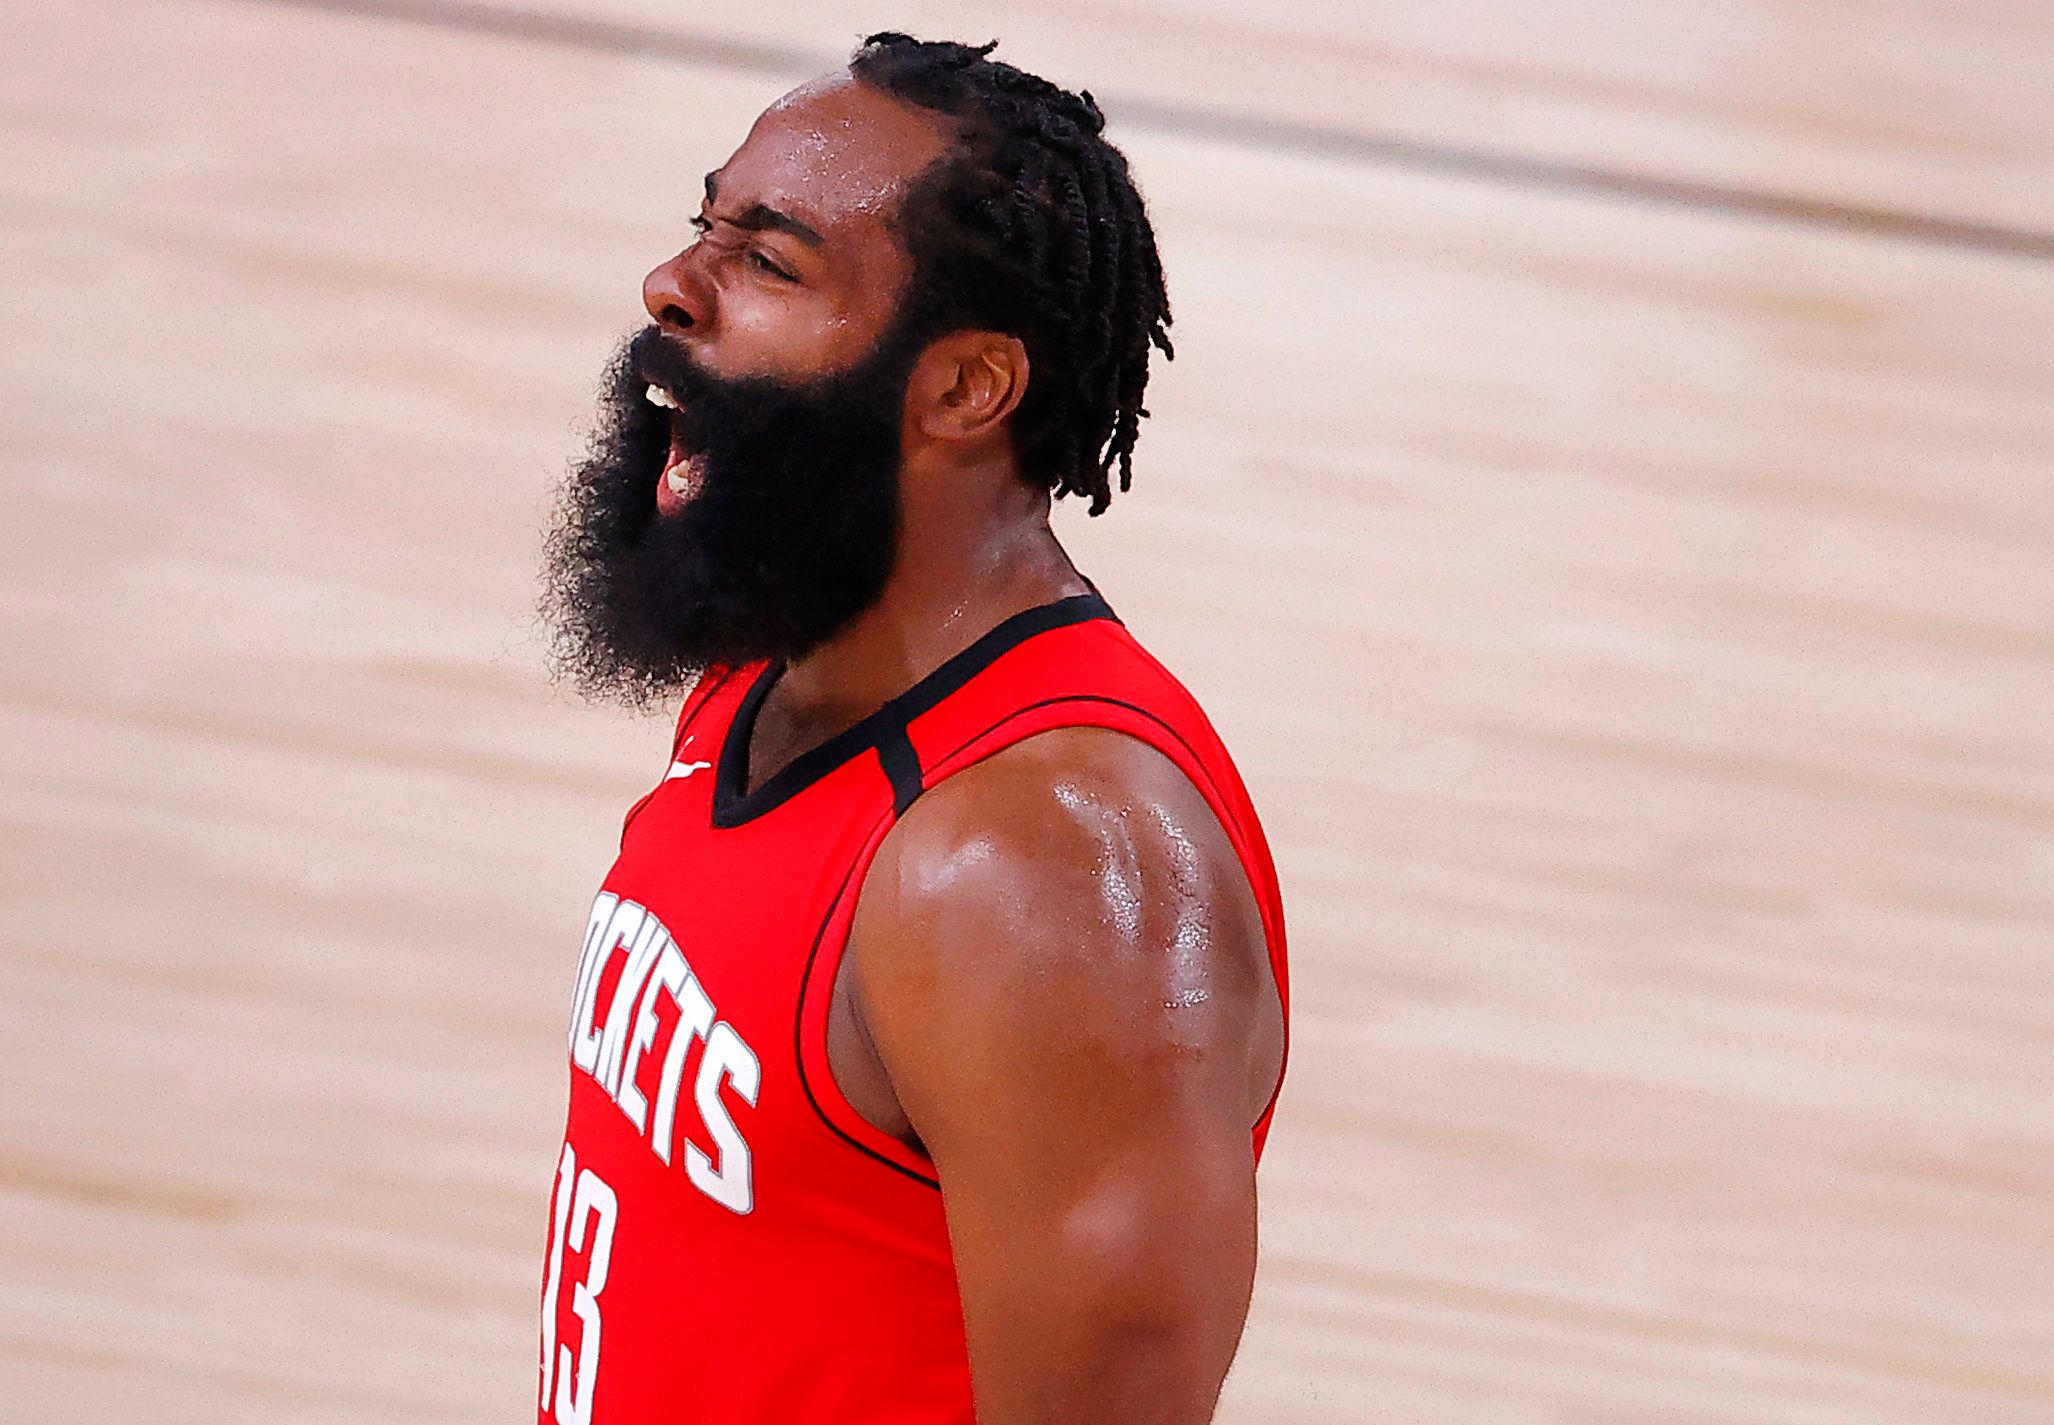 Rockets take a 2-0 series lead after beating Thunder, 111-98